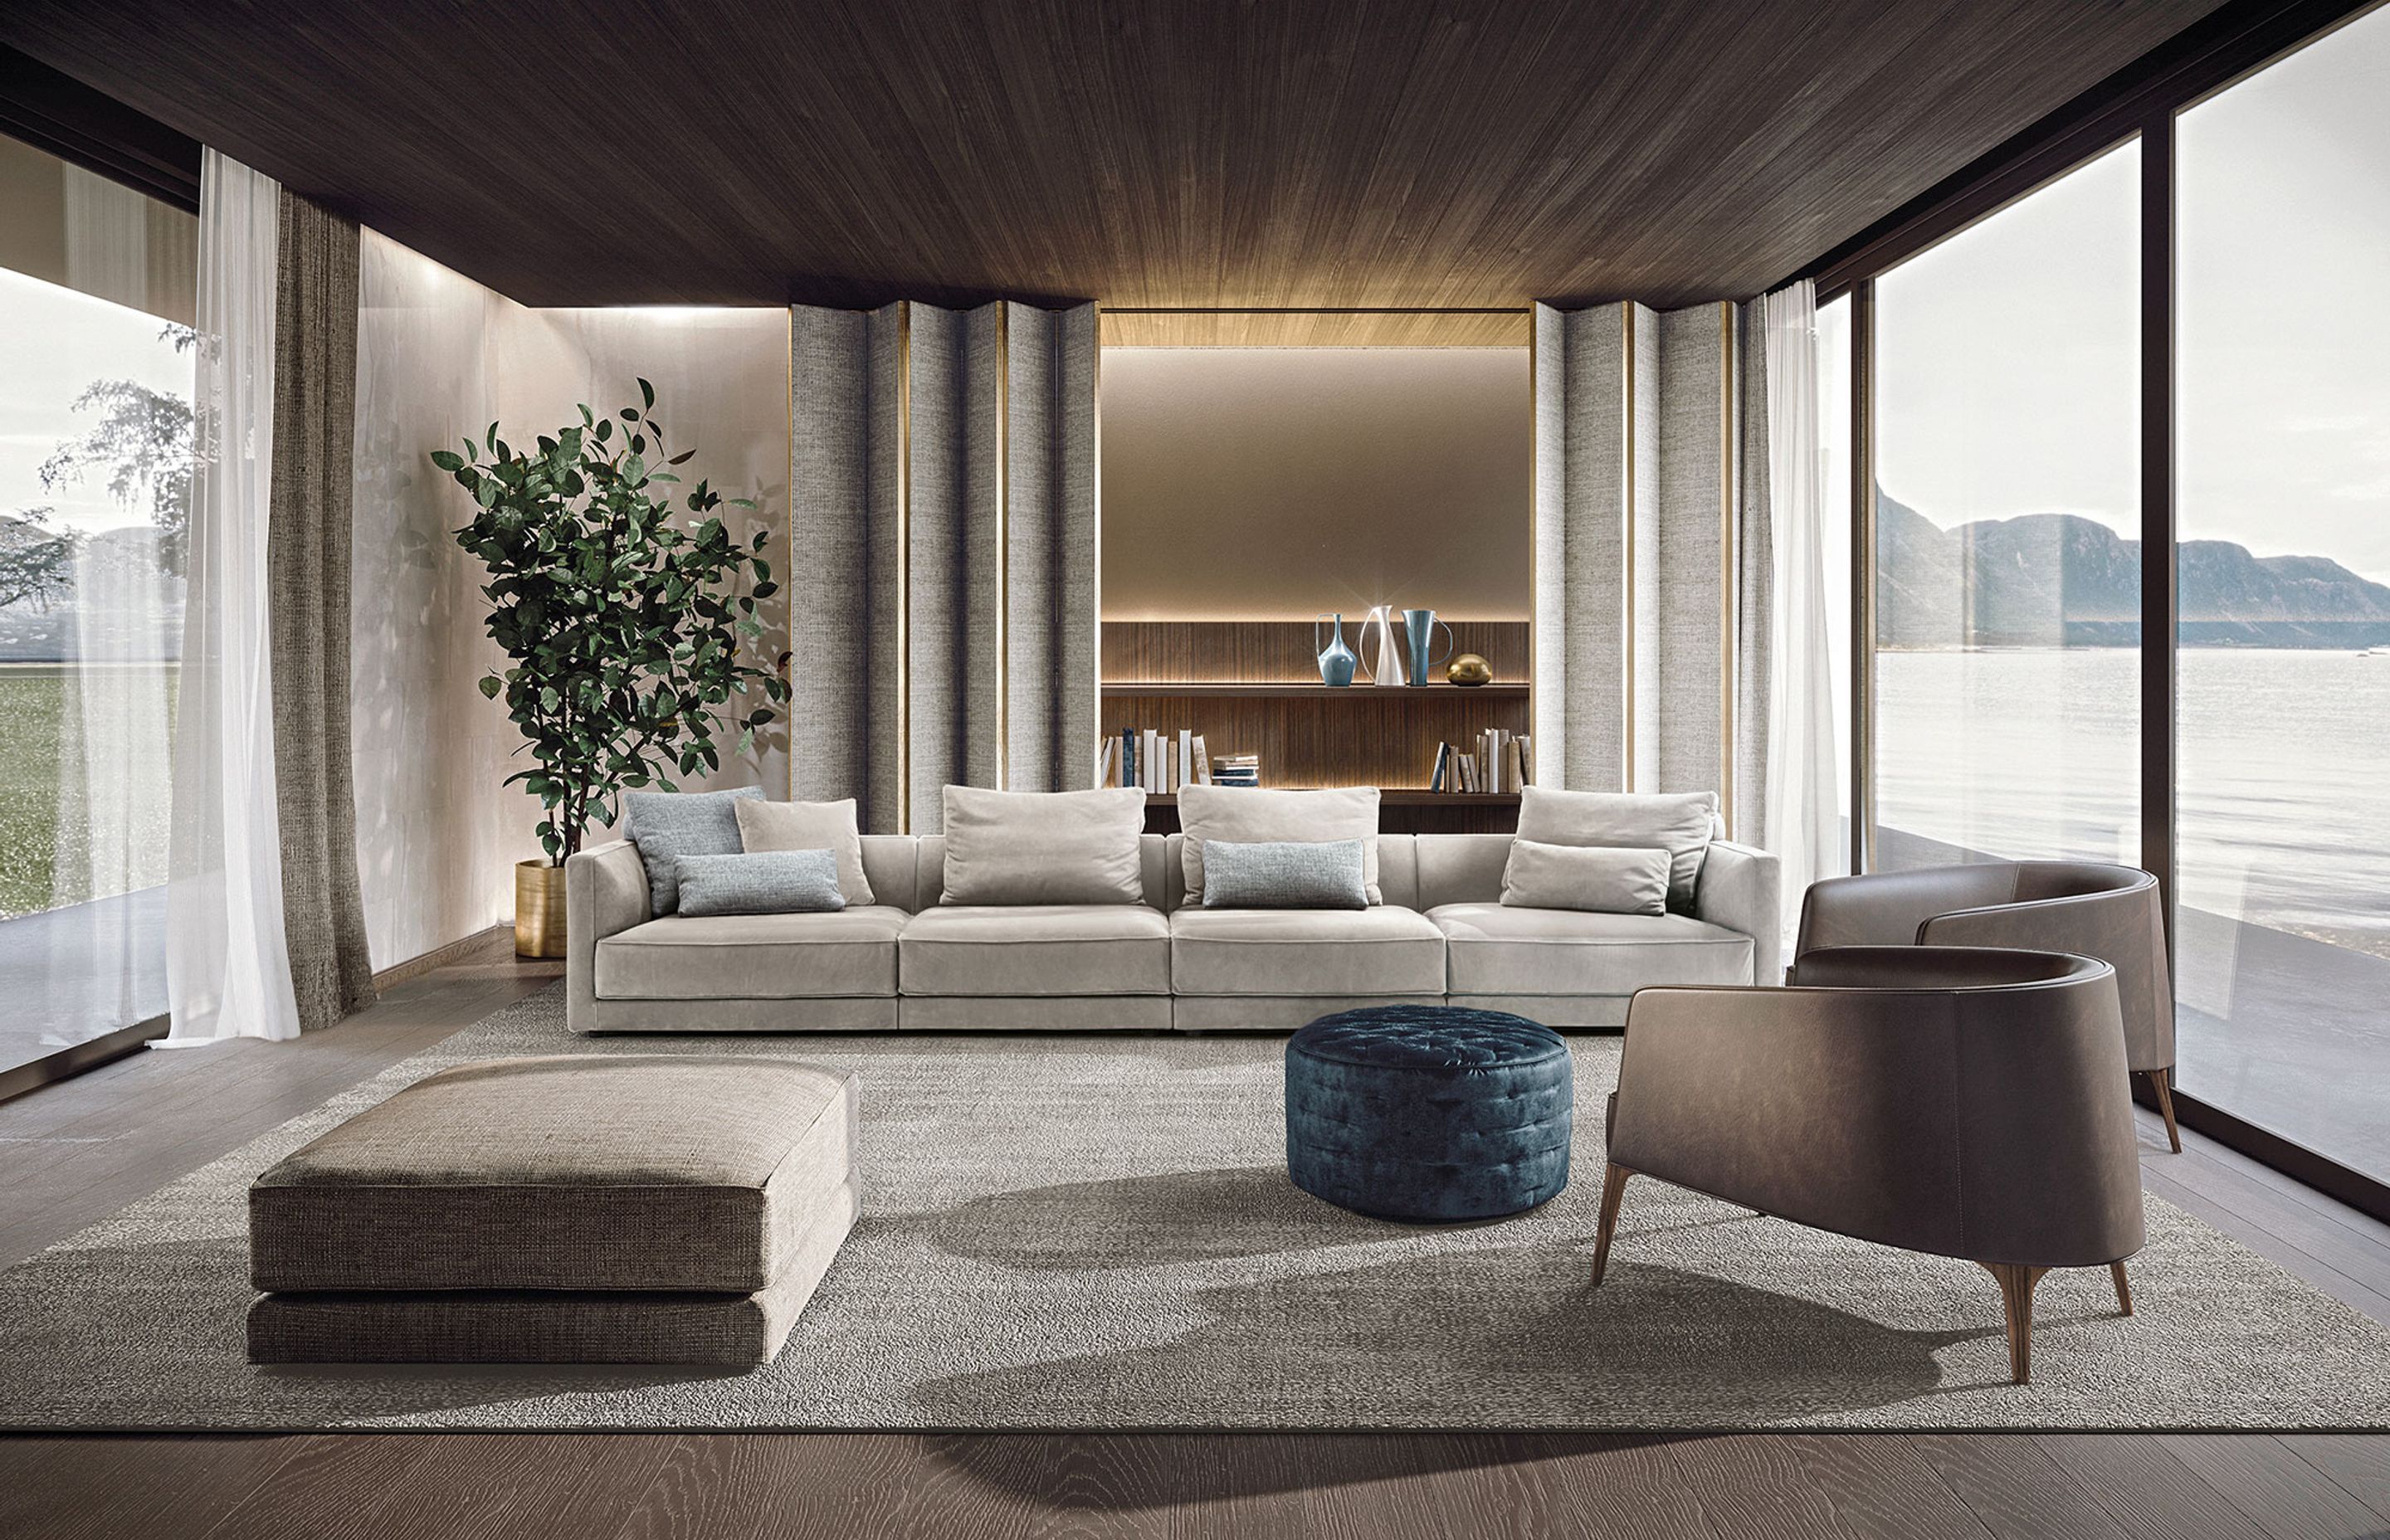 The Frigerio Miller sofa stuns with its smooth, quilted surface.